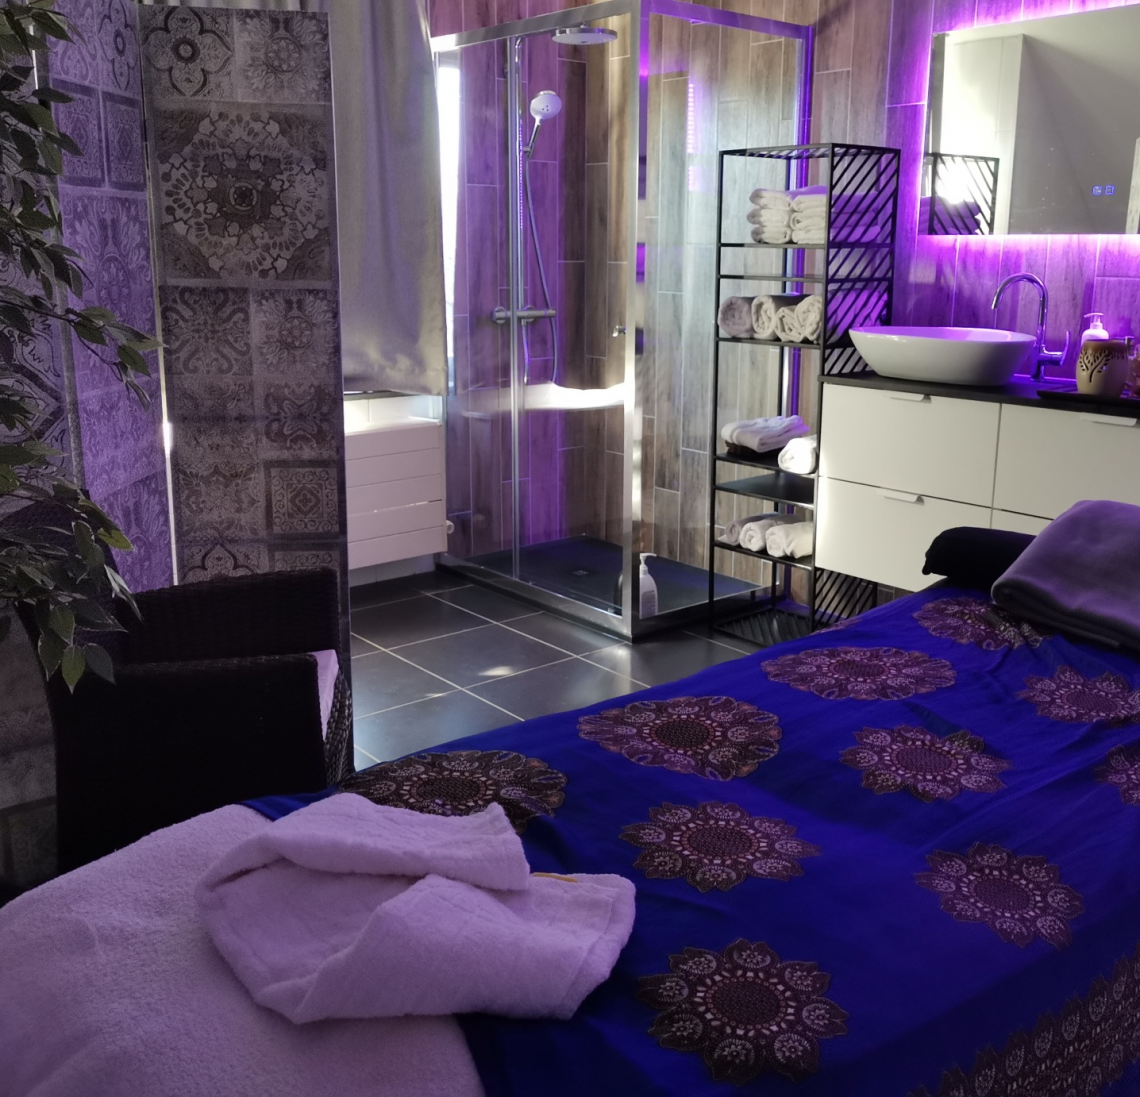 Samatha room (**) : massage and beauty treatments in new refined luxury room 